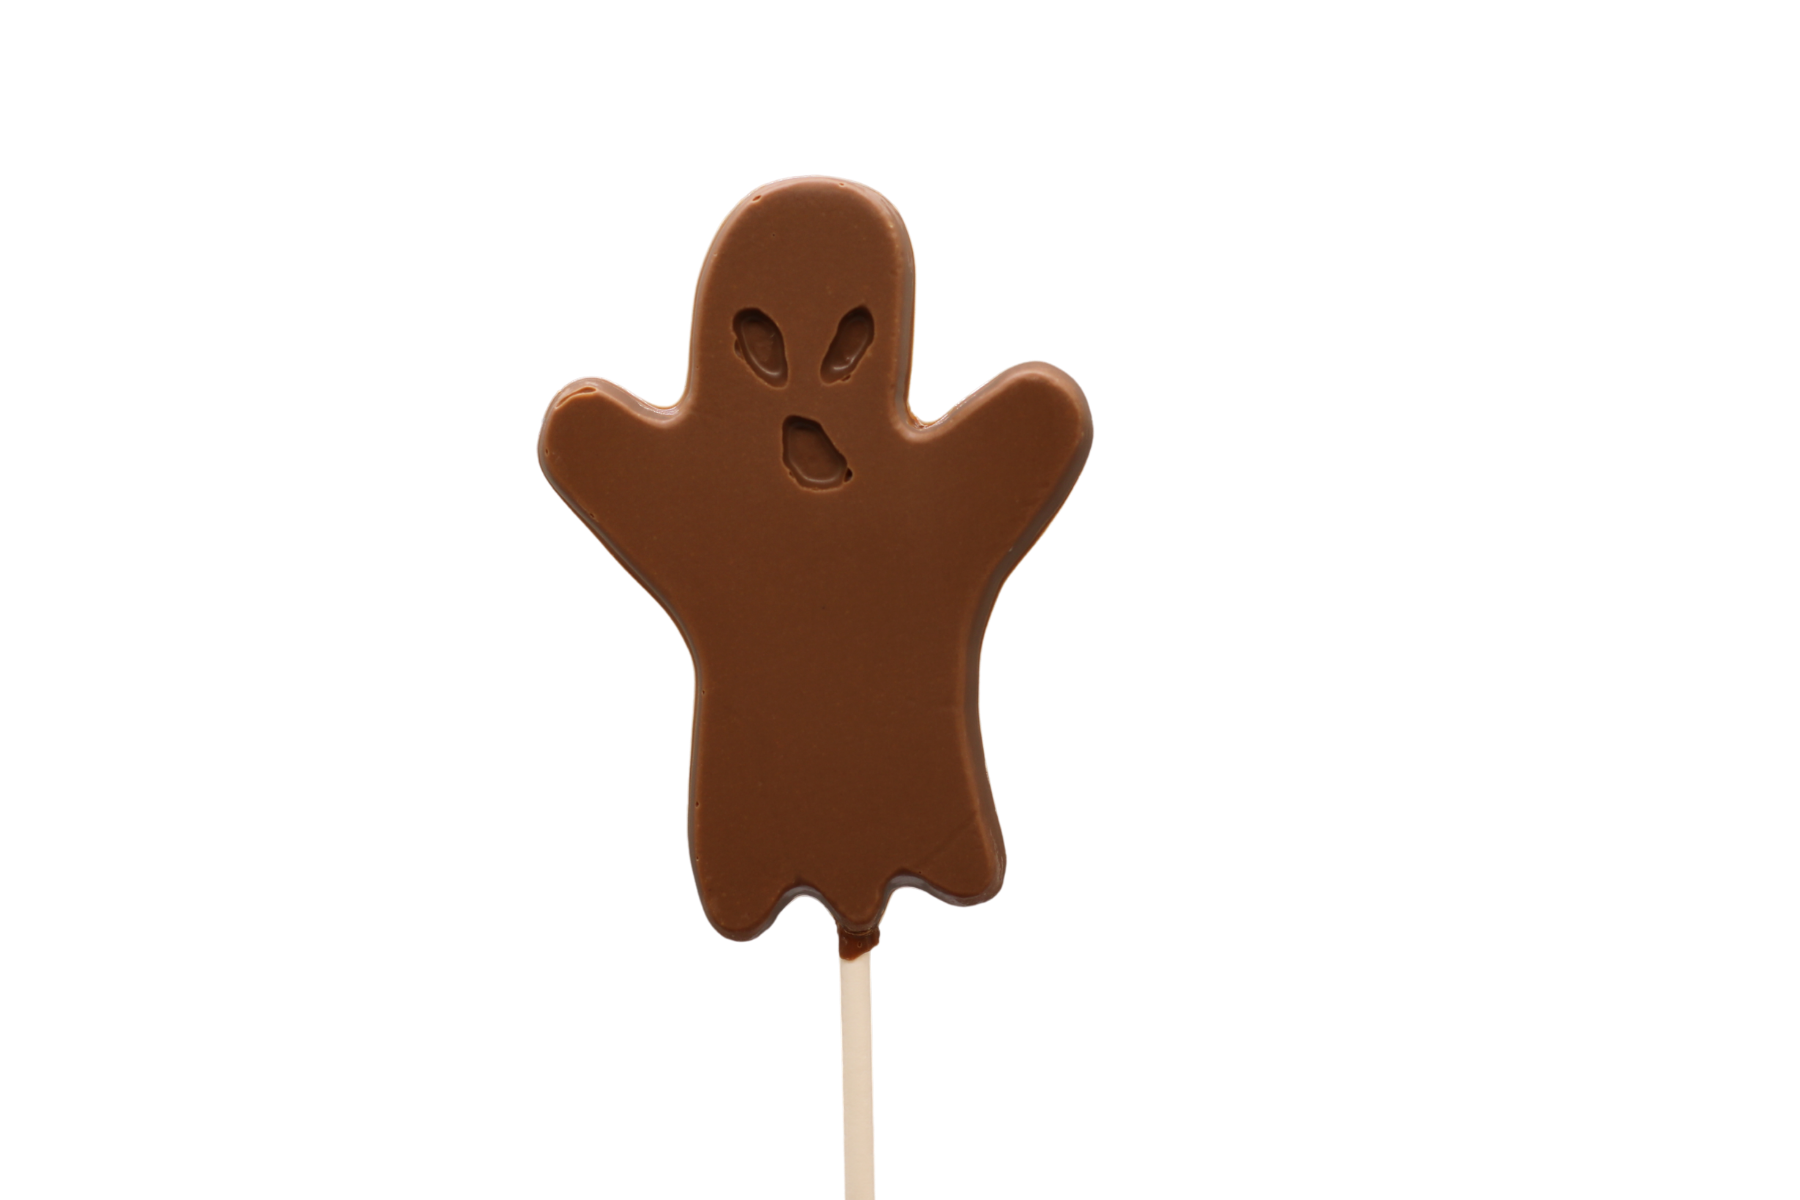 Halloween Treat: Classic Milk Chocolate Ghost Lollipop - A sweet and spooky delight for festive fun!